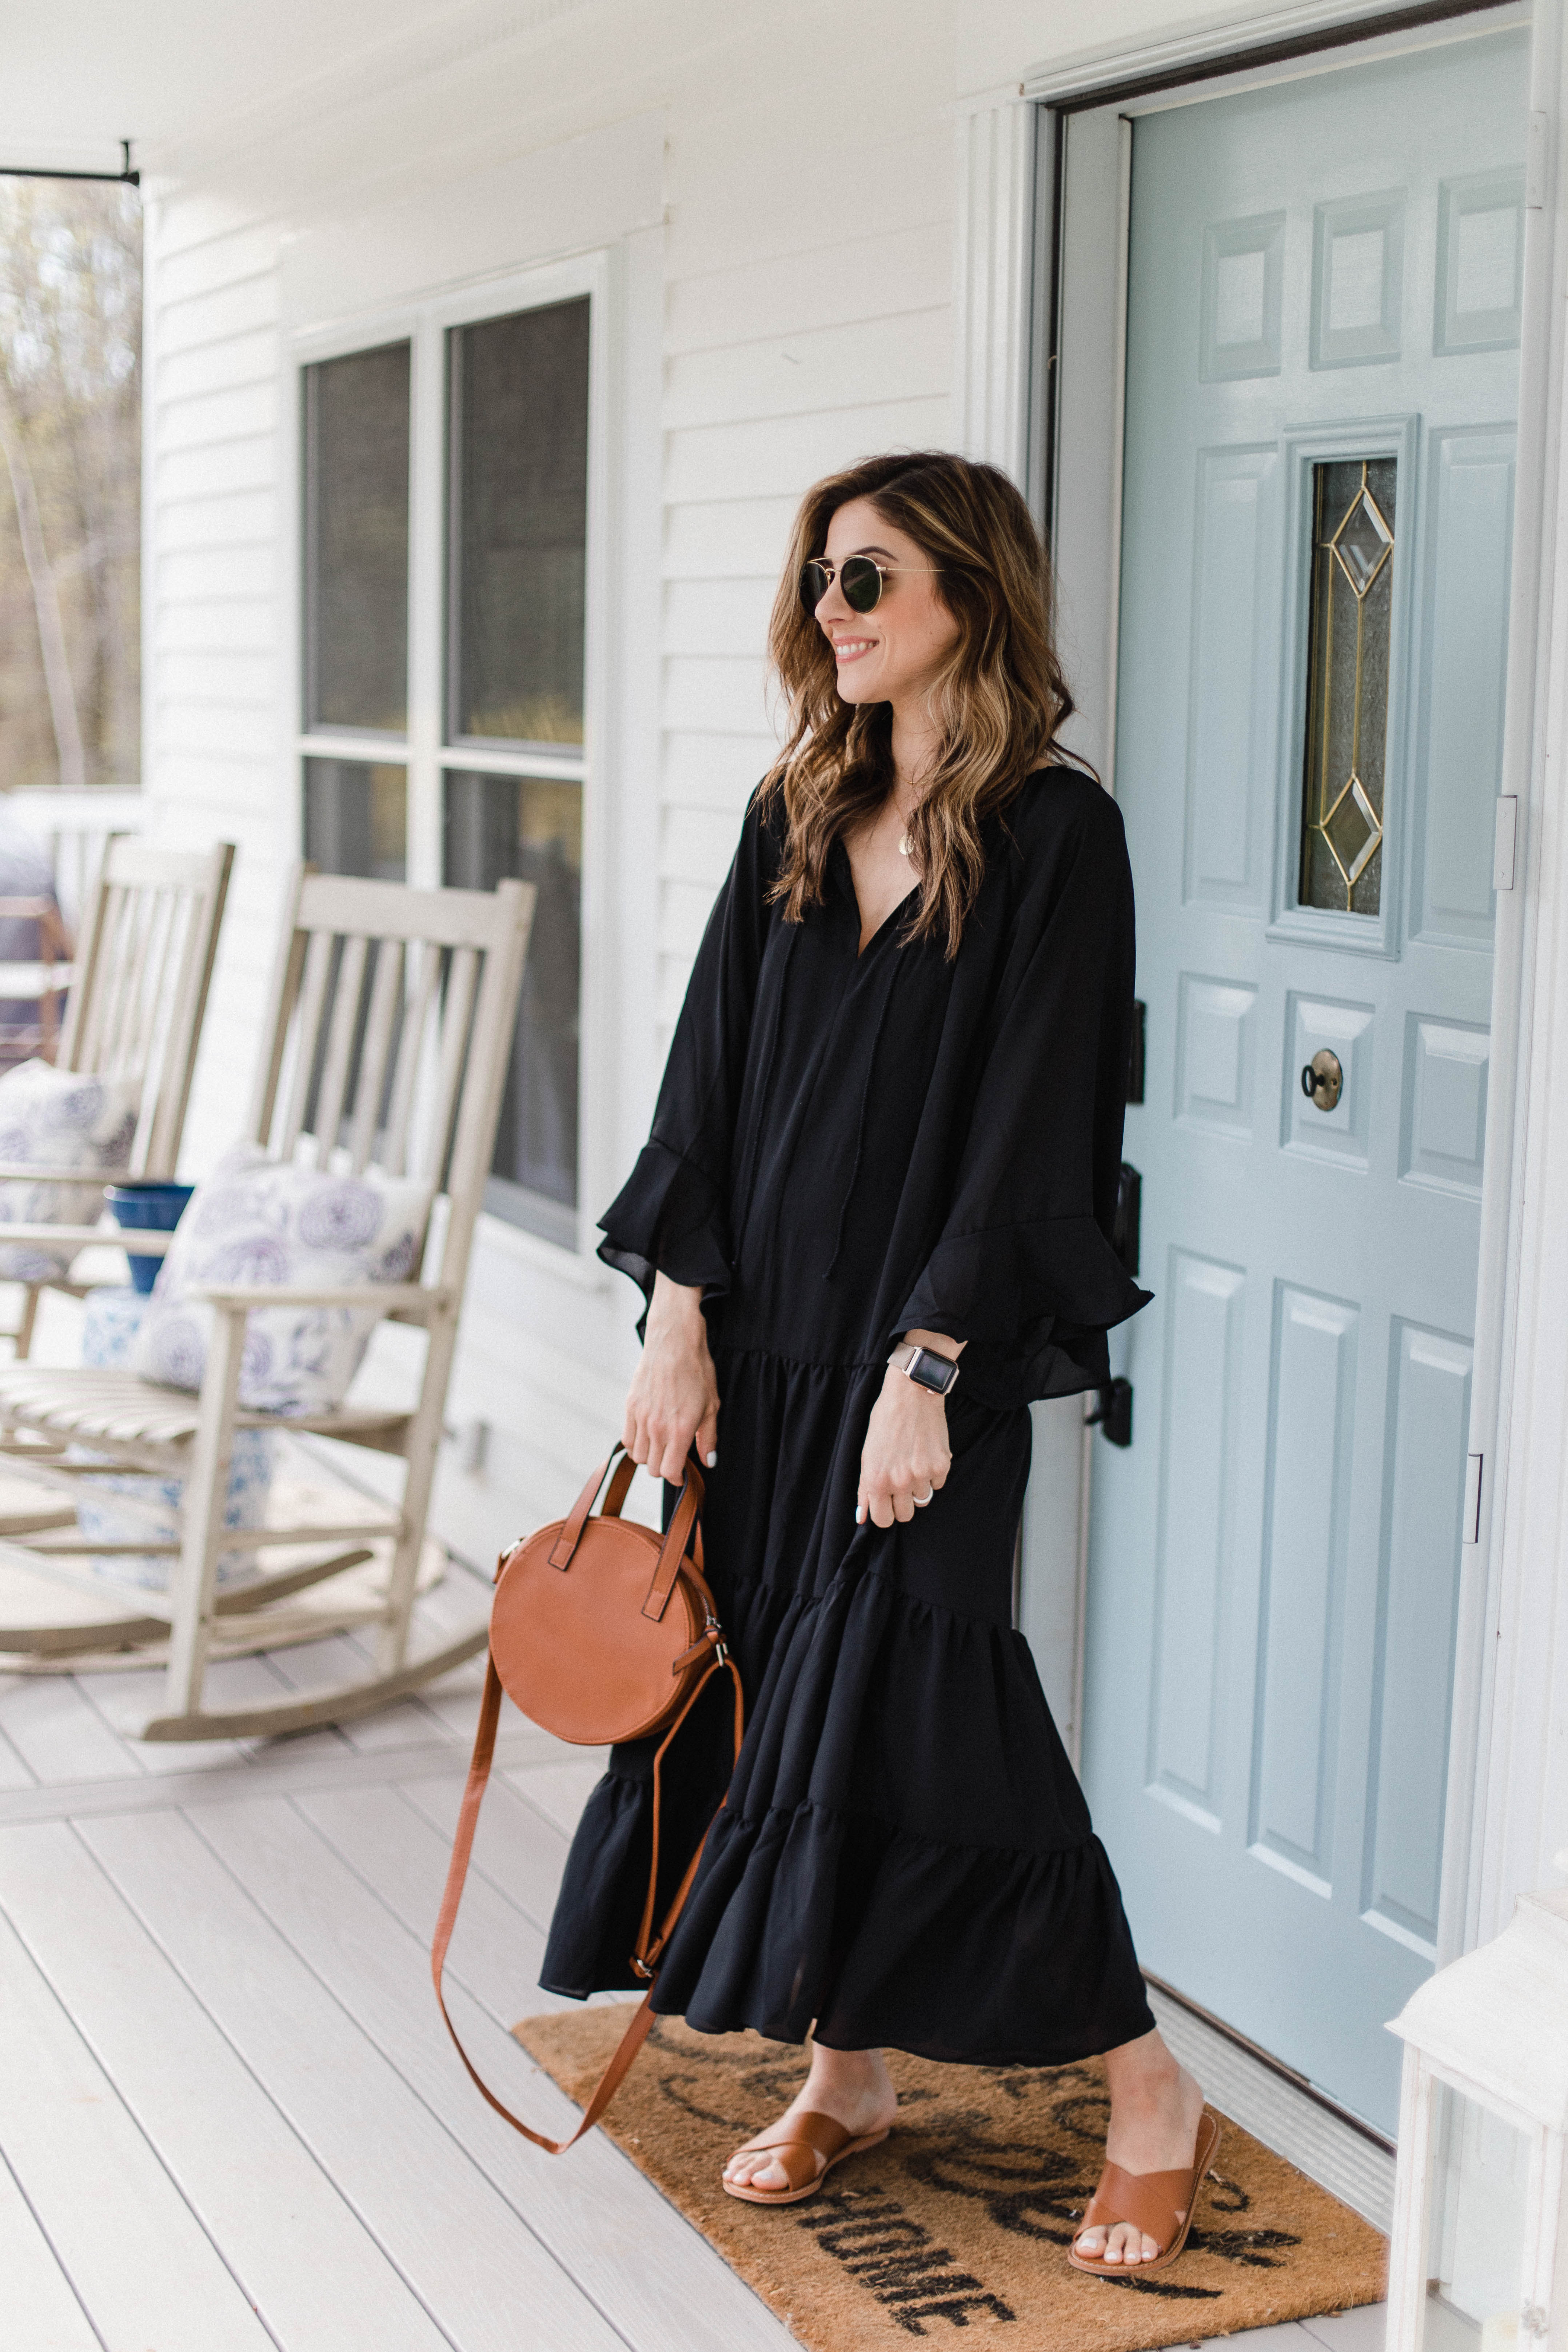 Connecticut life and style blogger Lauren McBride shares 3 spring wardrobe essentials that are budget friendly and versatile!